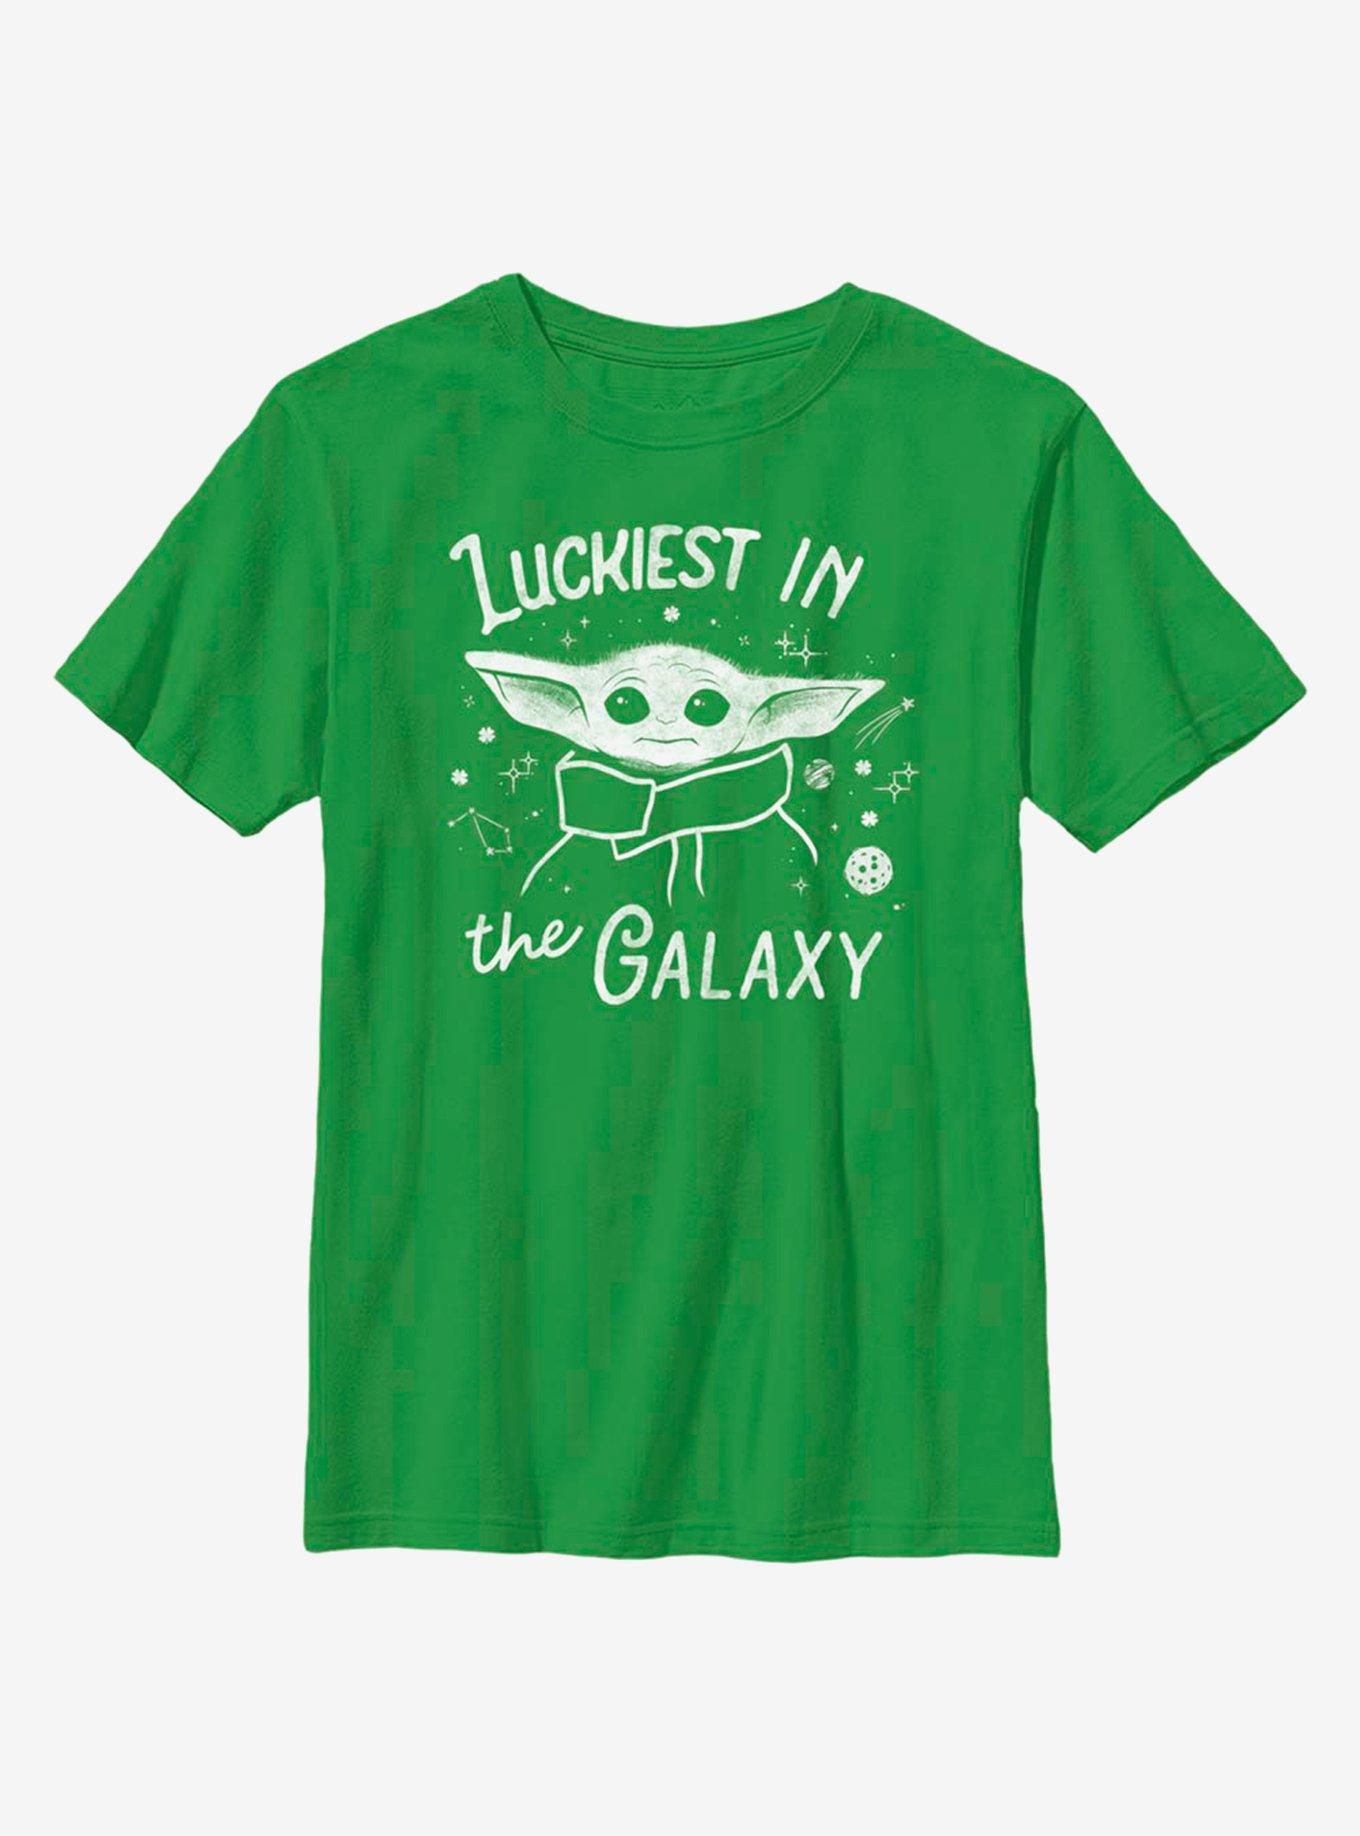 Star Wars The Mandalorian The Child Luckiest In The Galaxy Youth T-Shirt, KELLY, hi-res